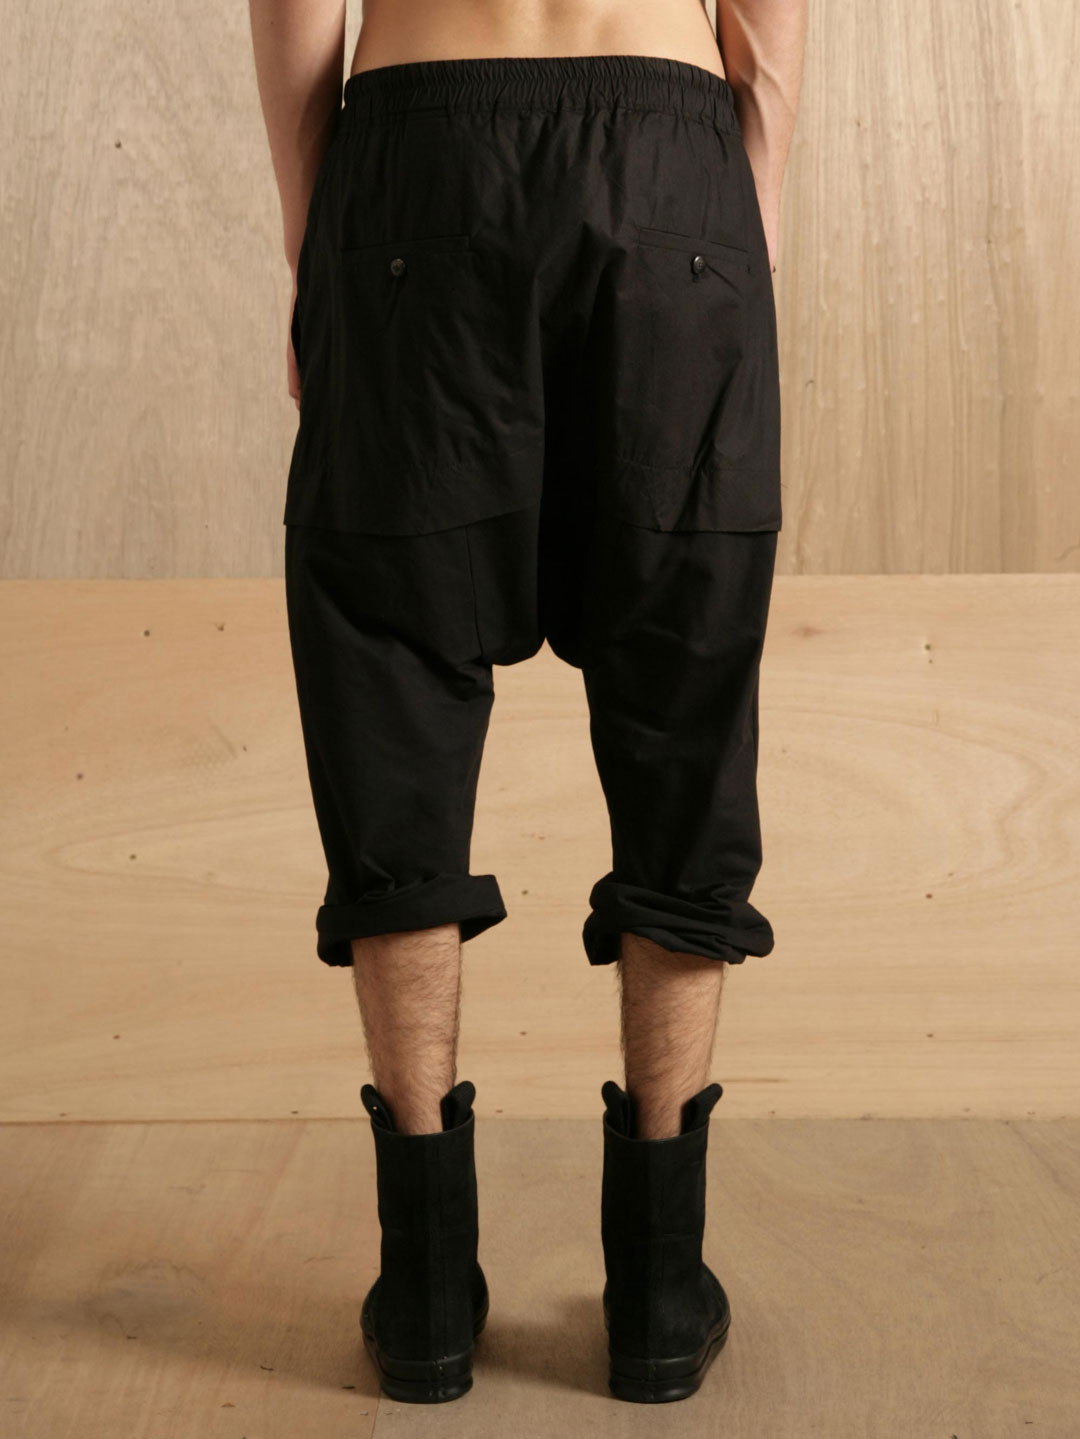 Rick Owens Rick Owens Mens Cropped Skirt Trousers in Black for Men - Lyst